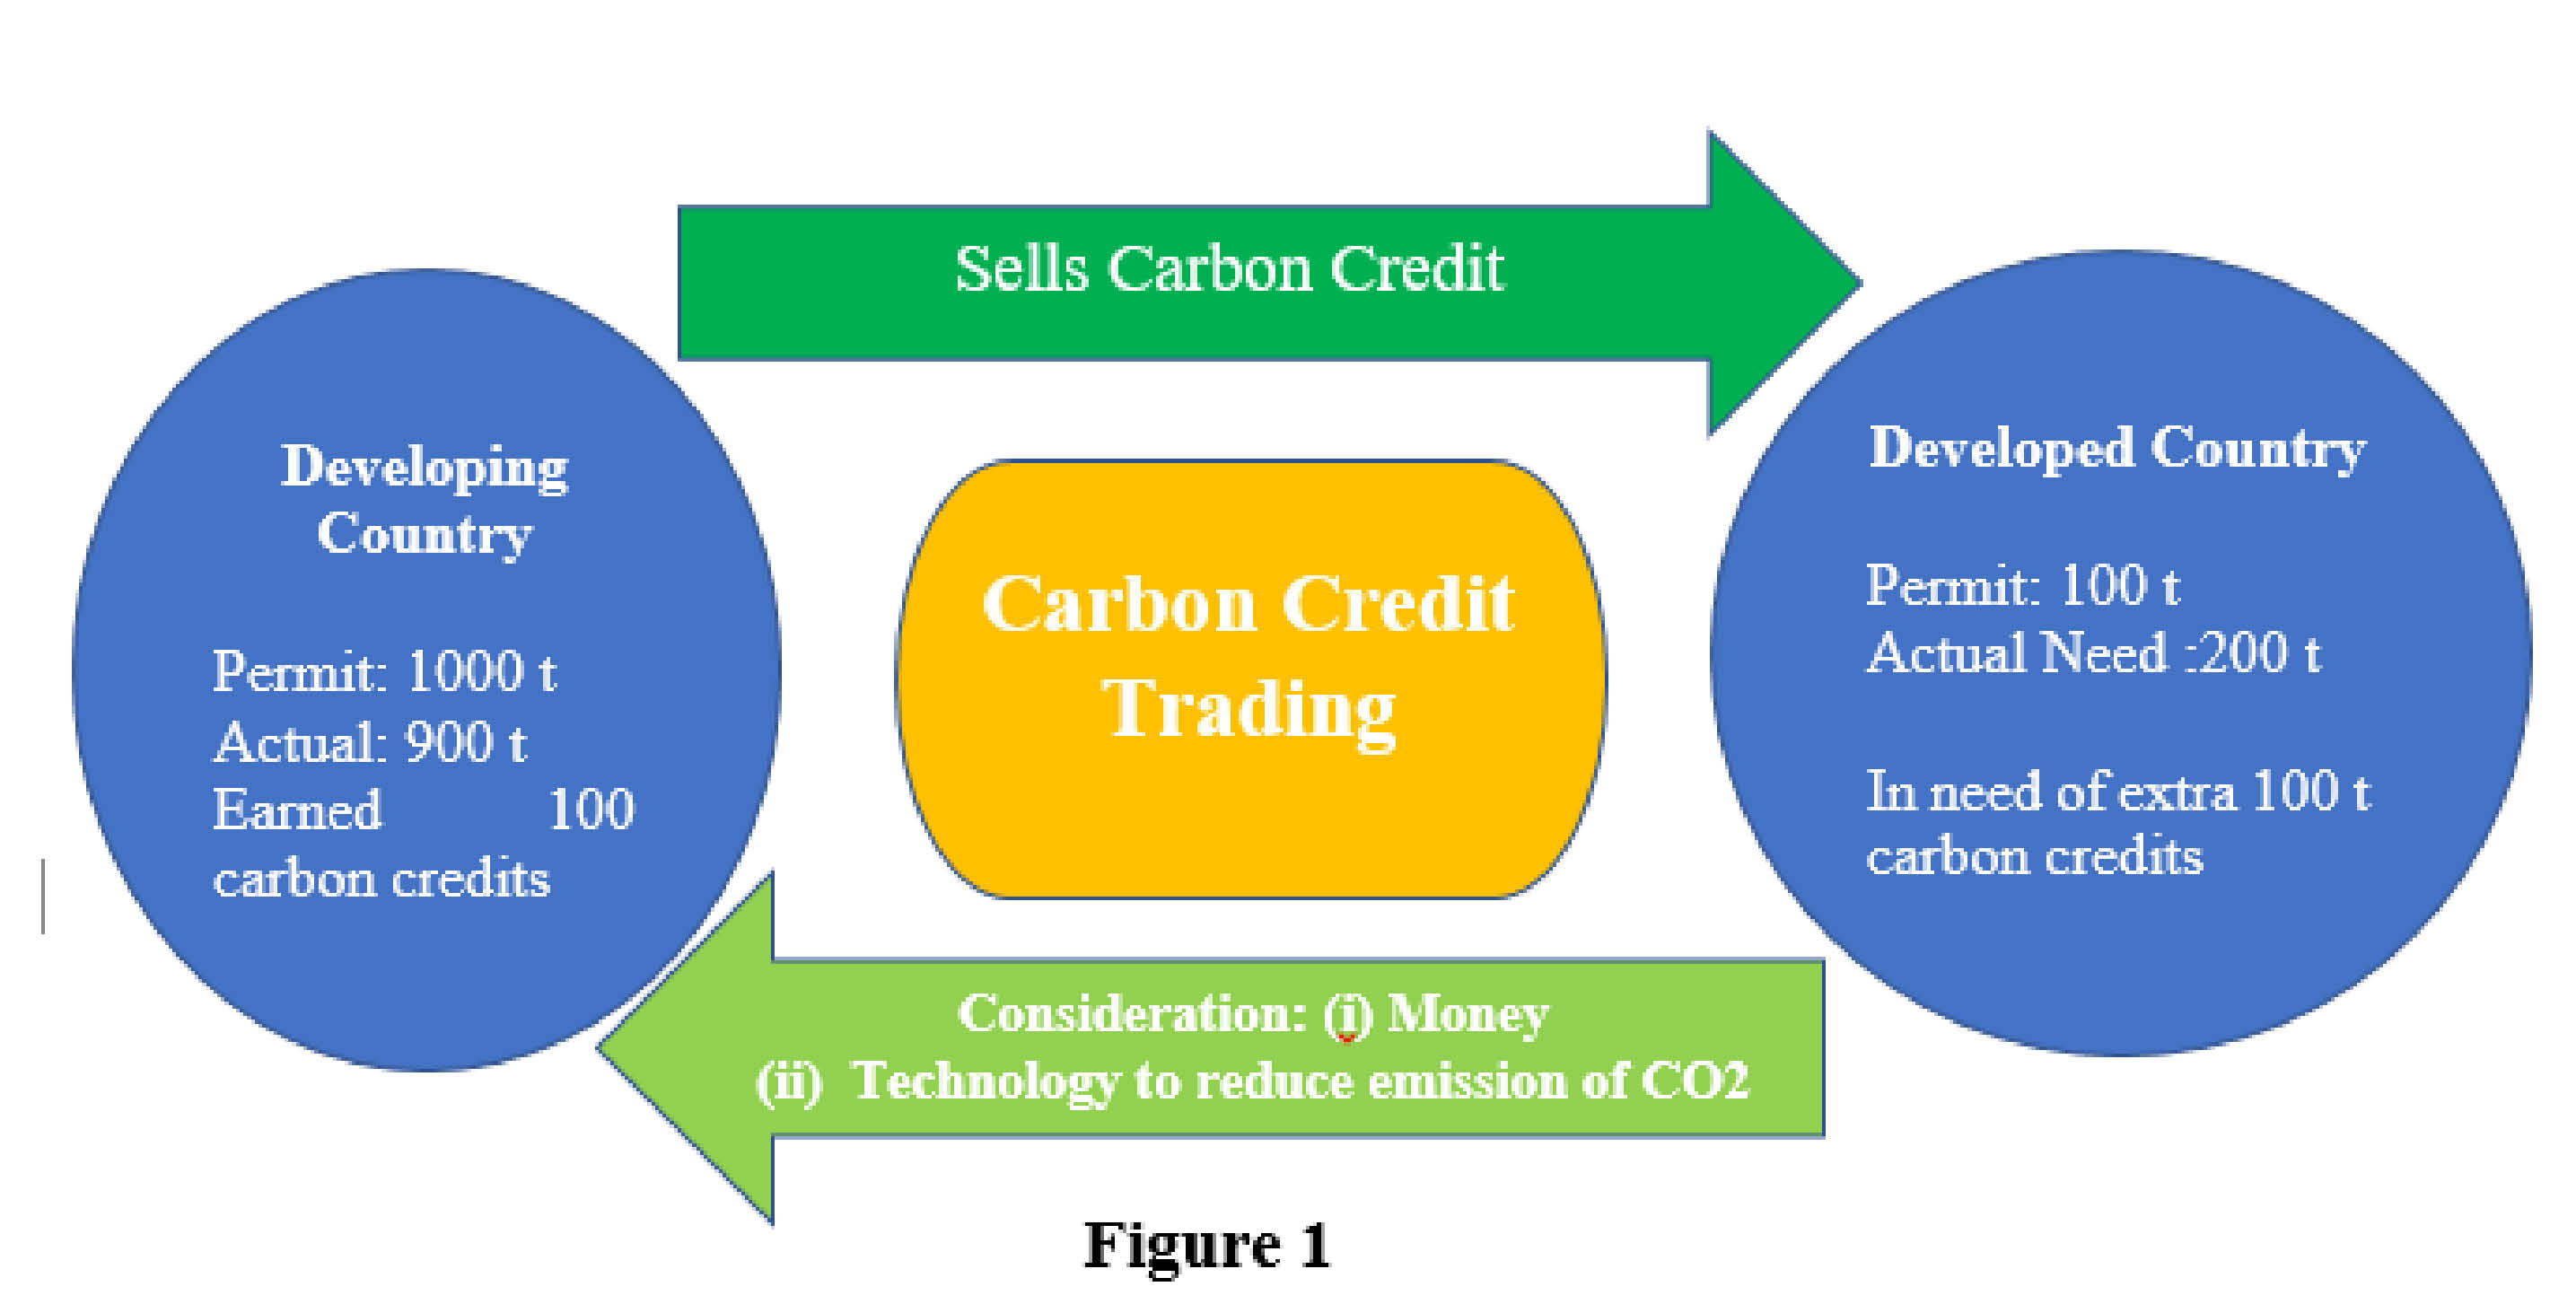 India emerges as one of biggest sellers of Carbon Credits